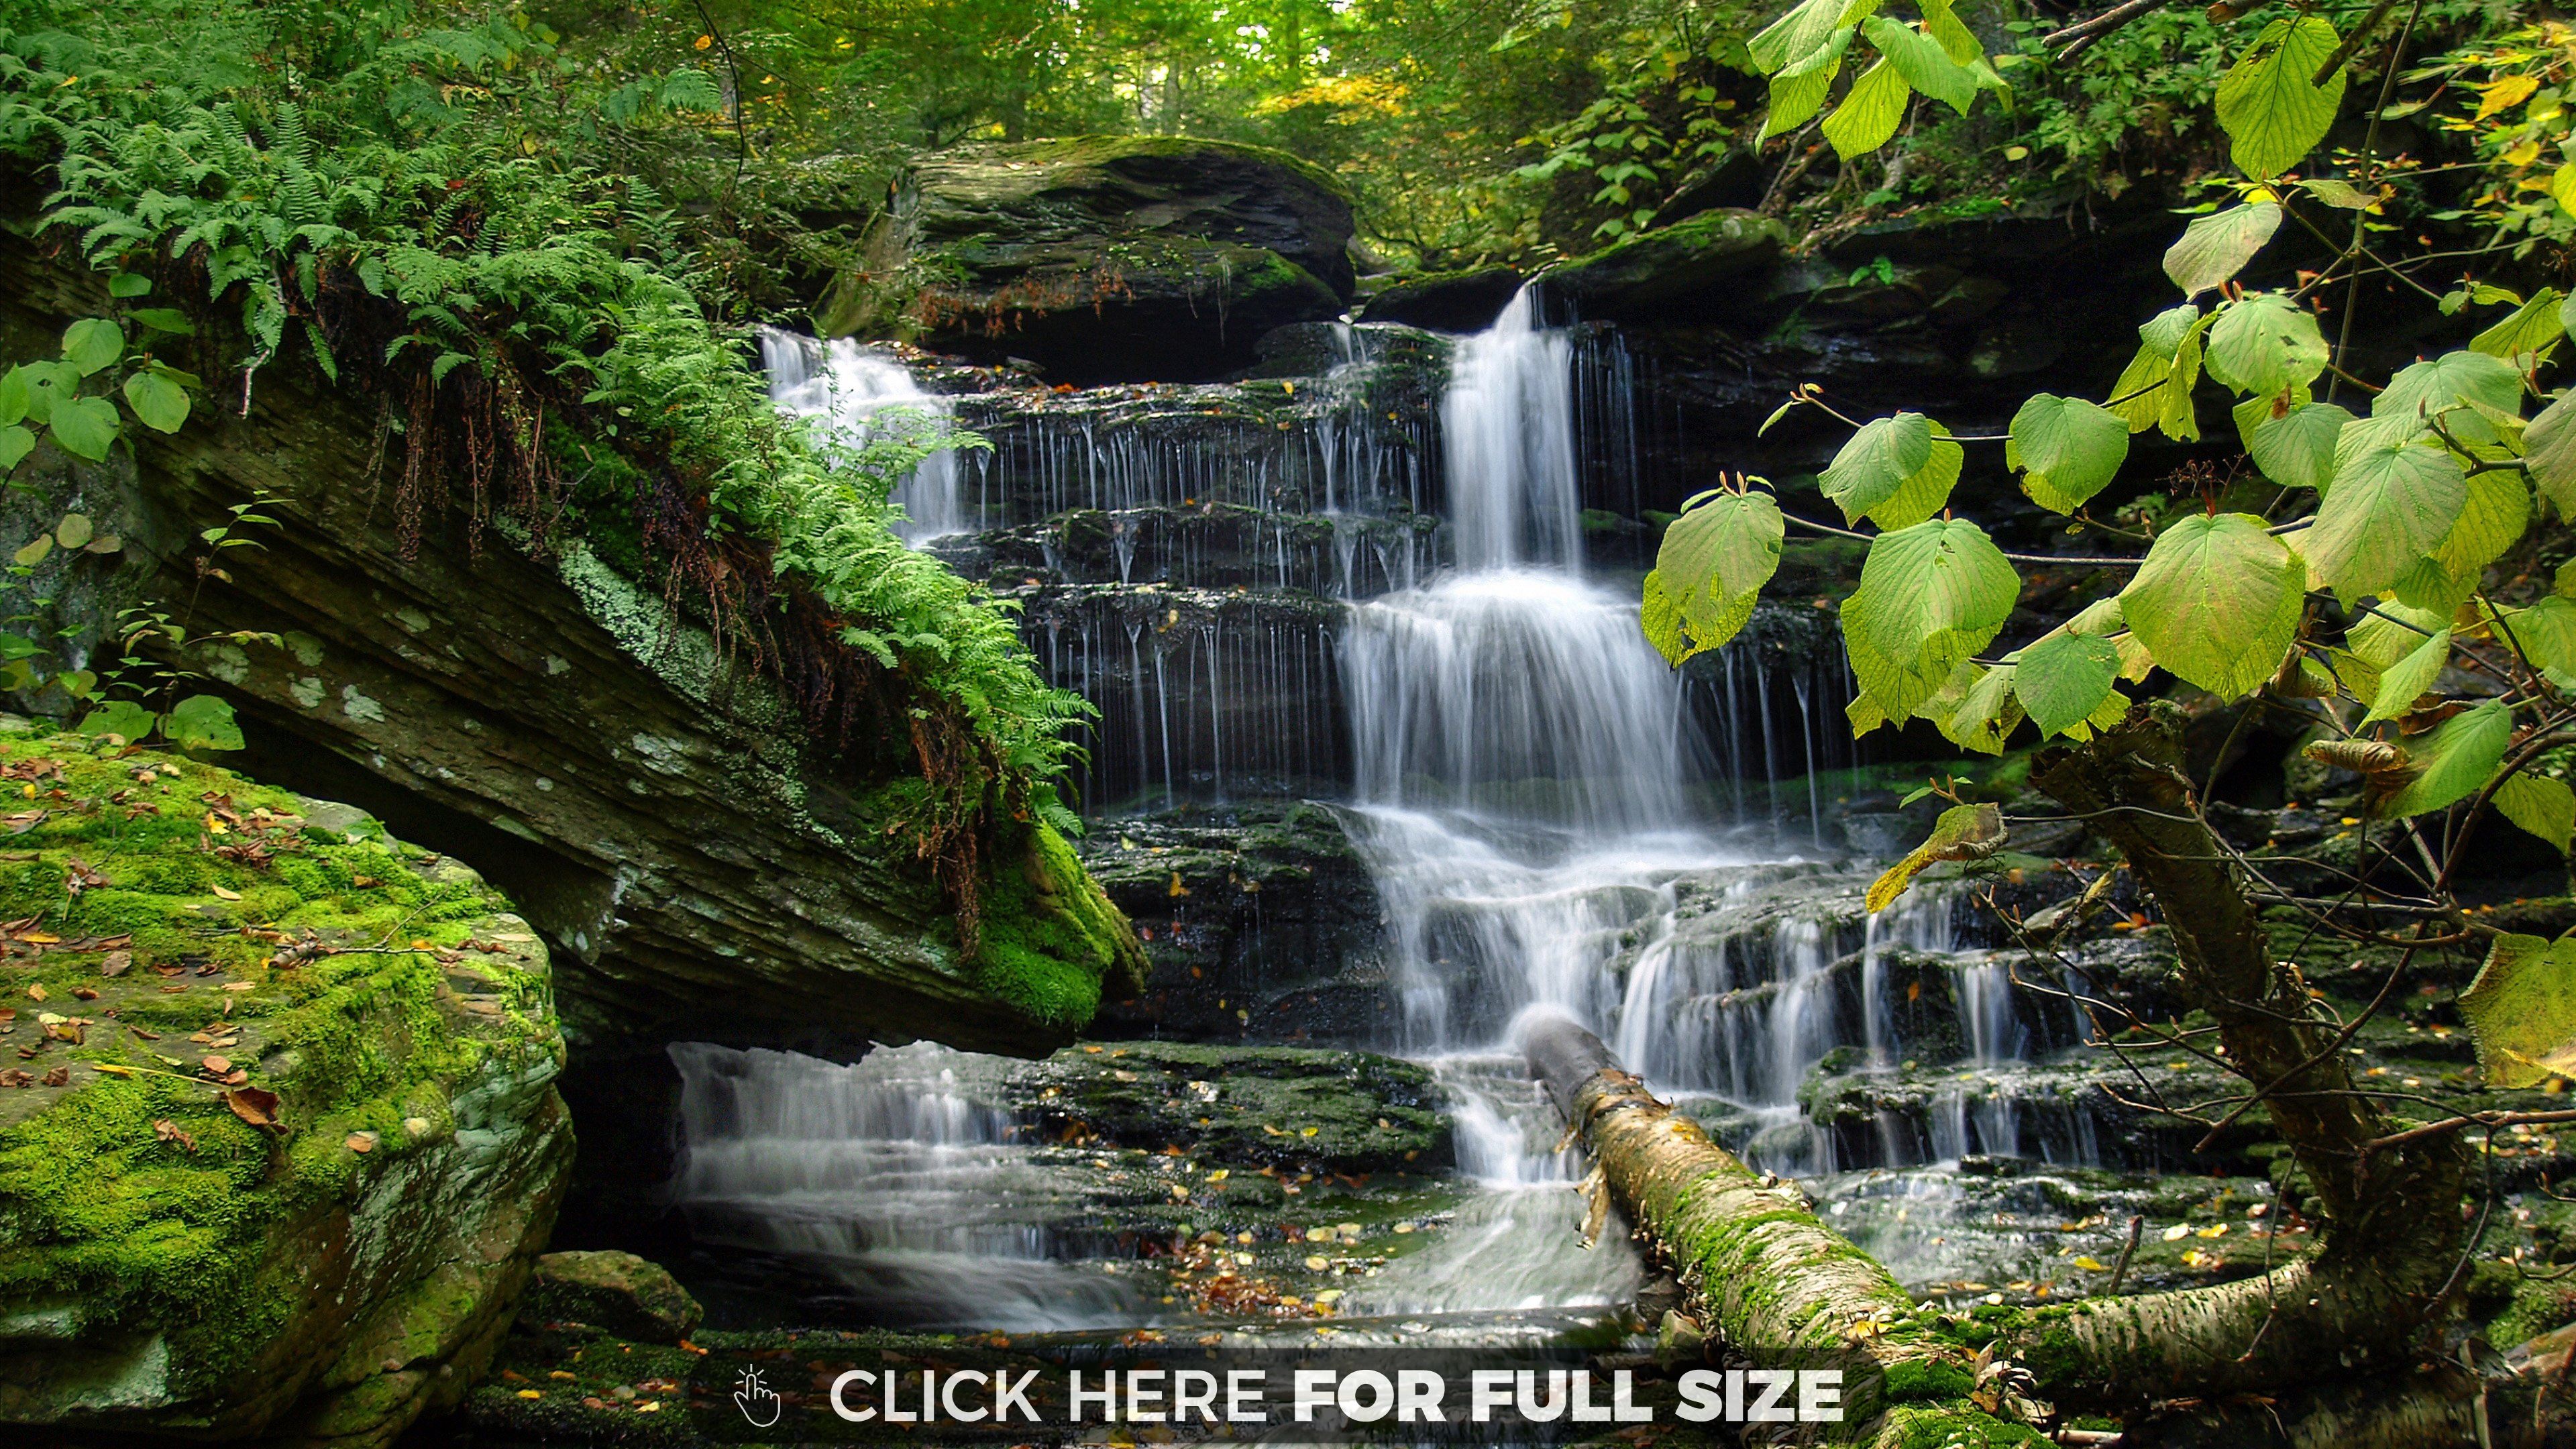 8k Ultra Hd Nature Wallpaper-b5t6y44 - Best Hd Nature Wallpapers For  Android - 3840x2160 Wallpaper 